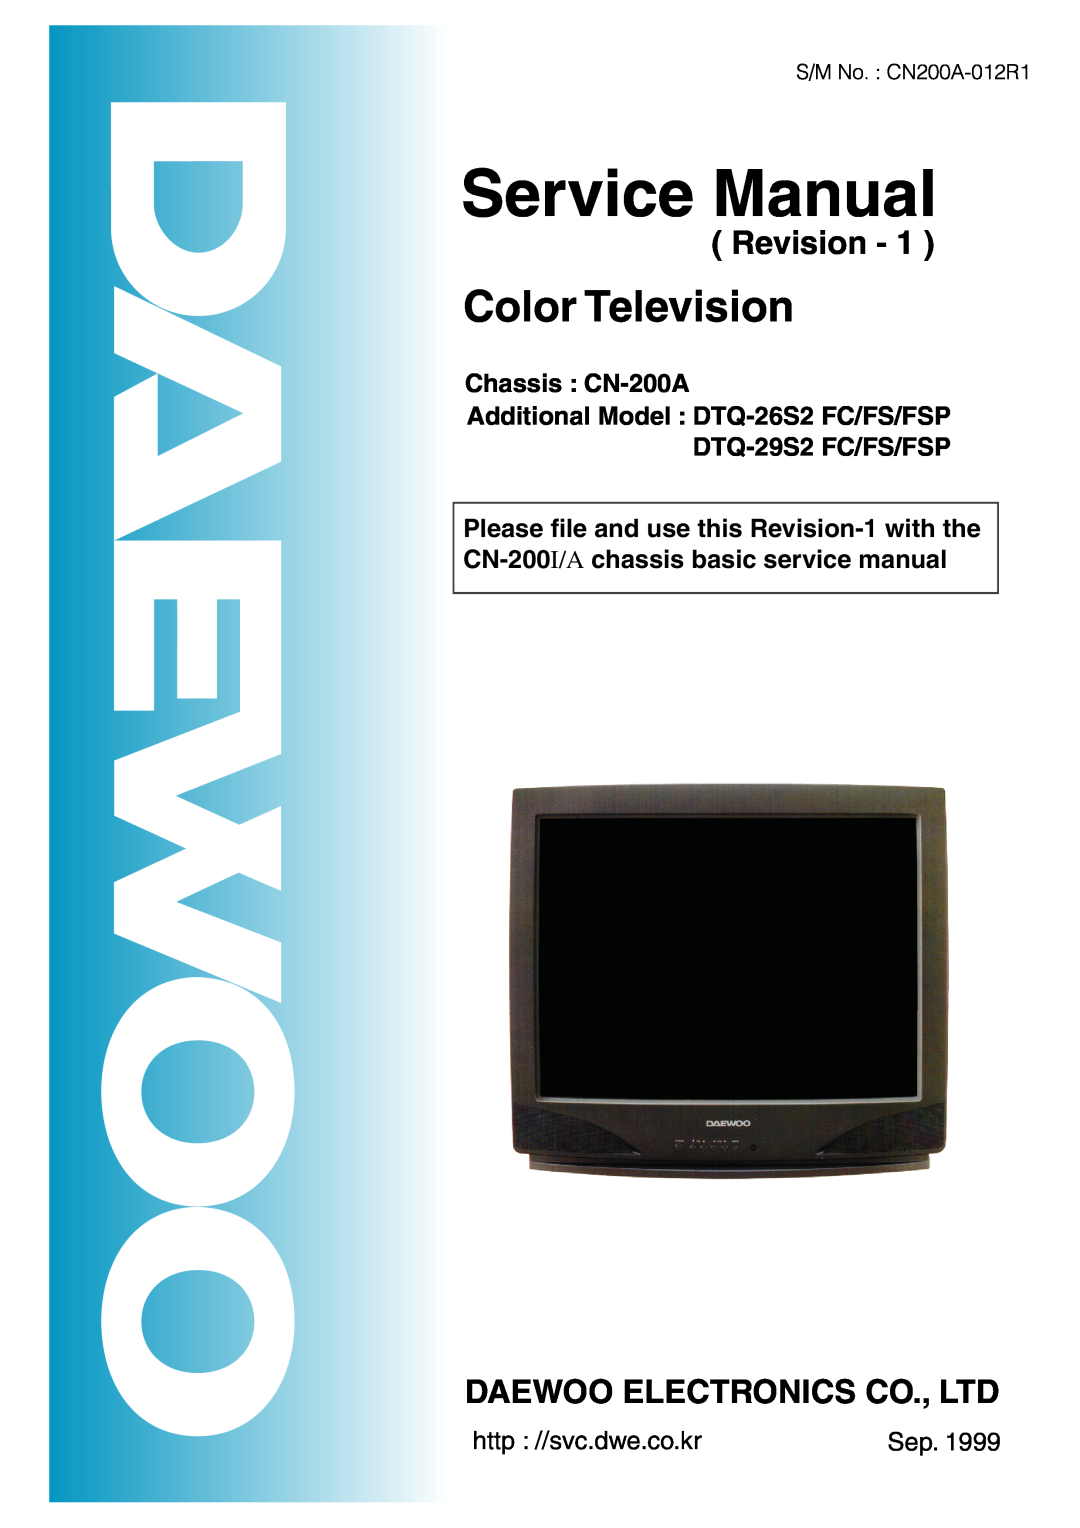 Daewoo DTQ-29S2 FSP service manual Service Manual, Color Television, Revision, DTQ-29S2 FC/FS/FSP, http //svc.dwe.co.kr 